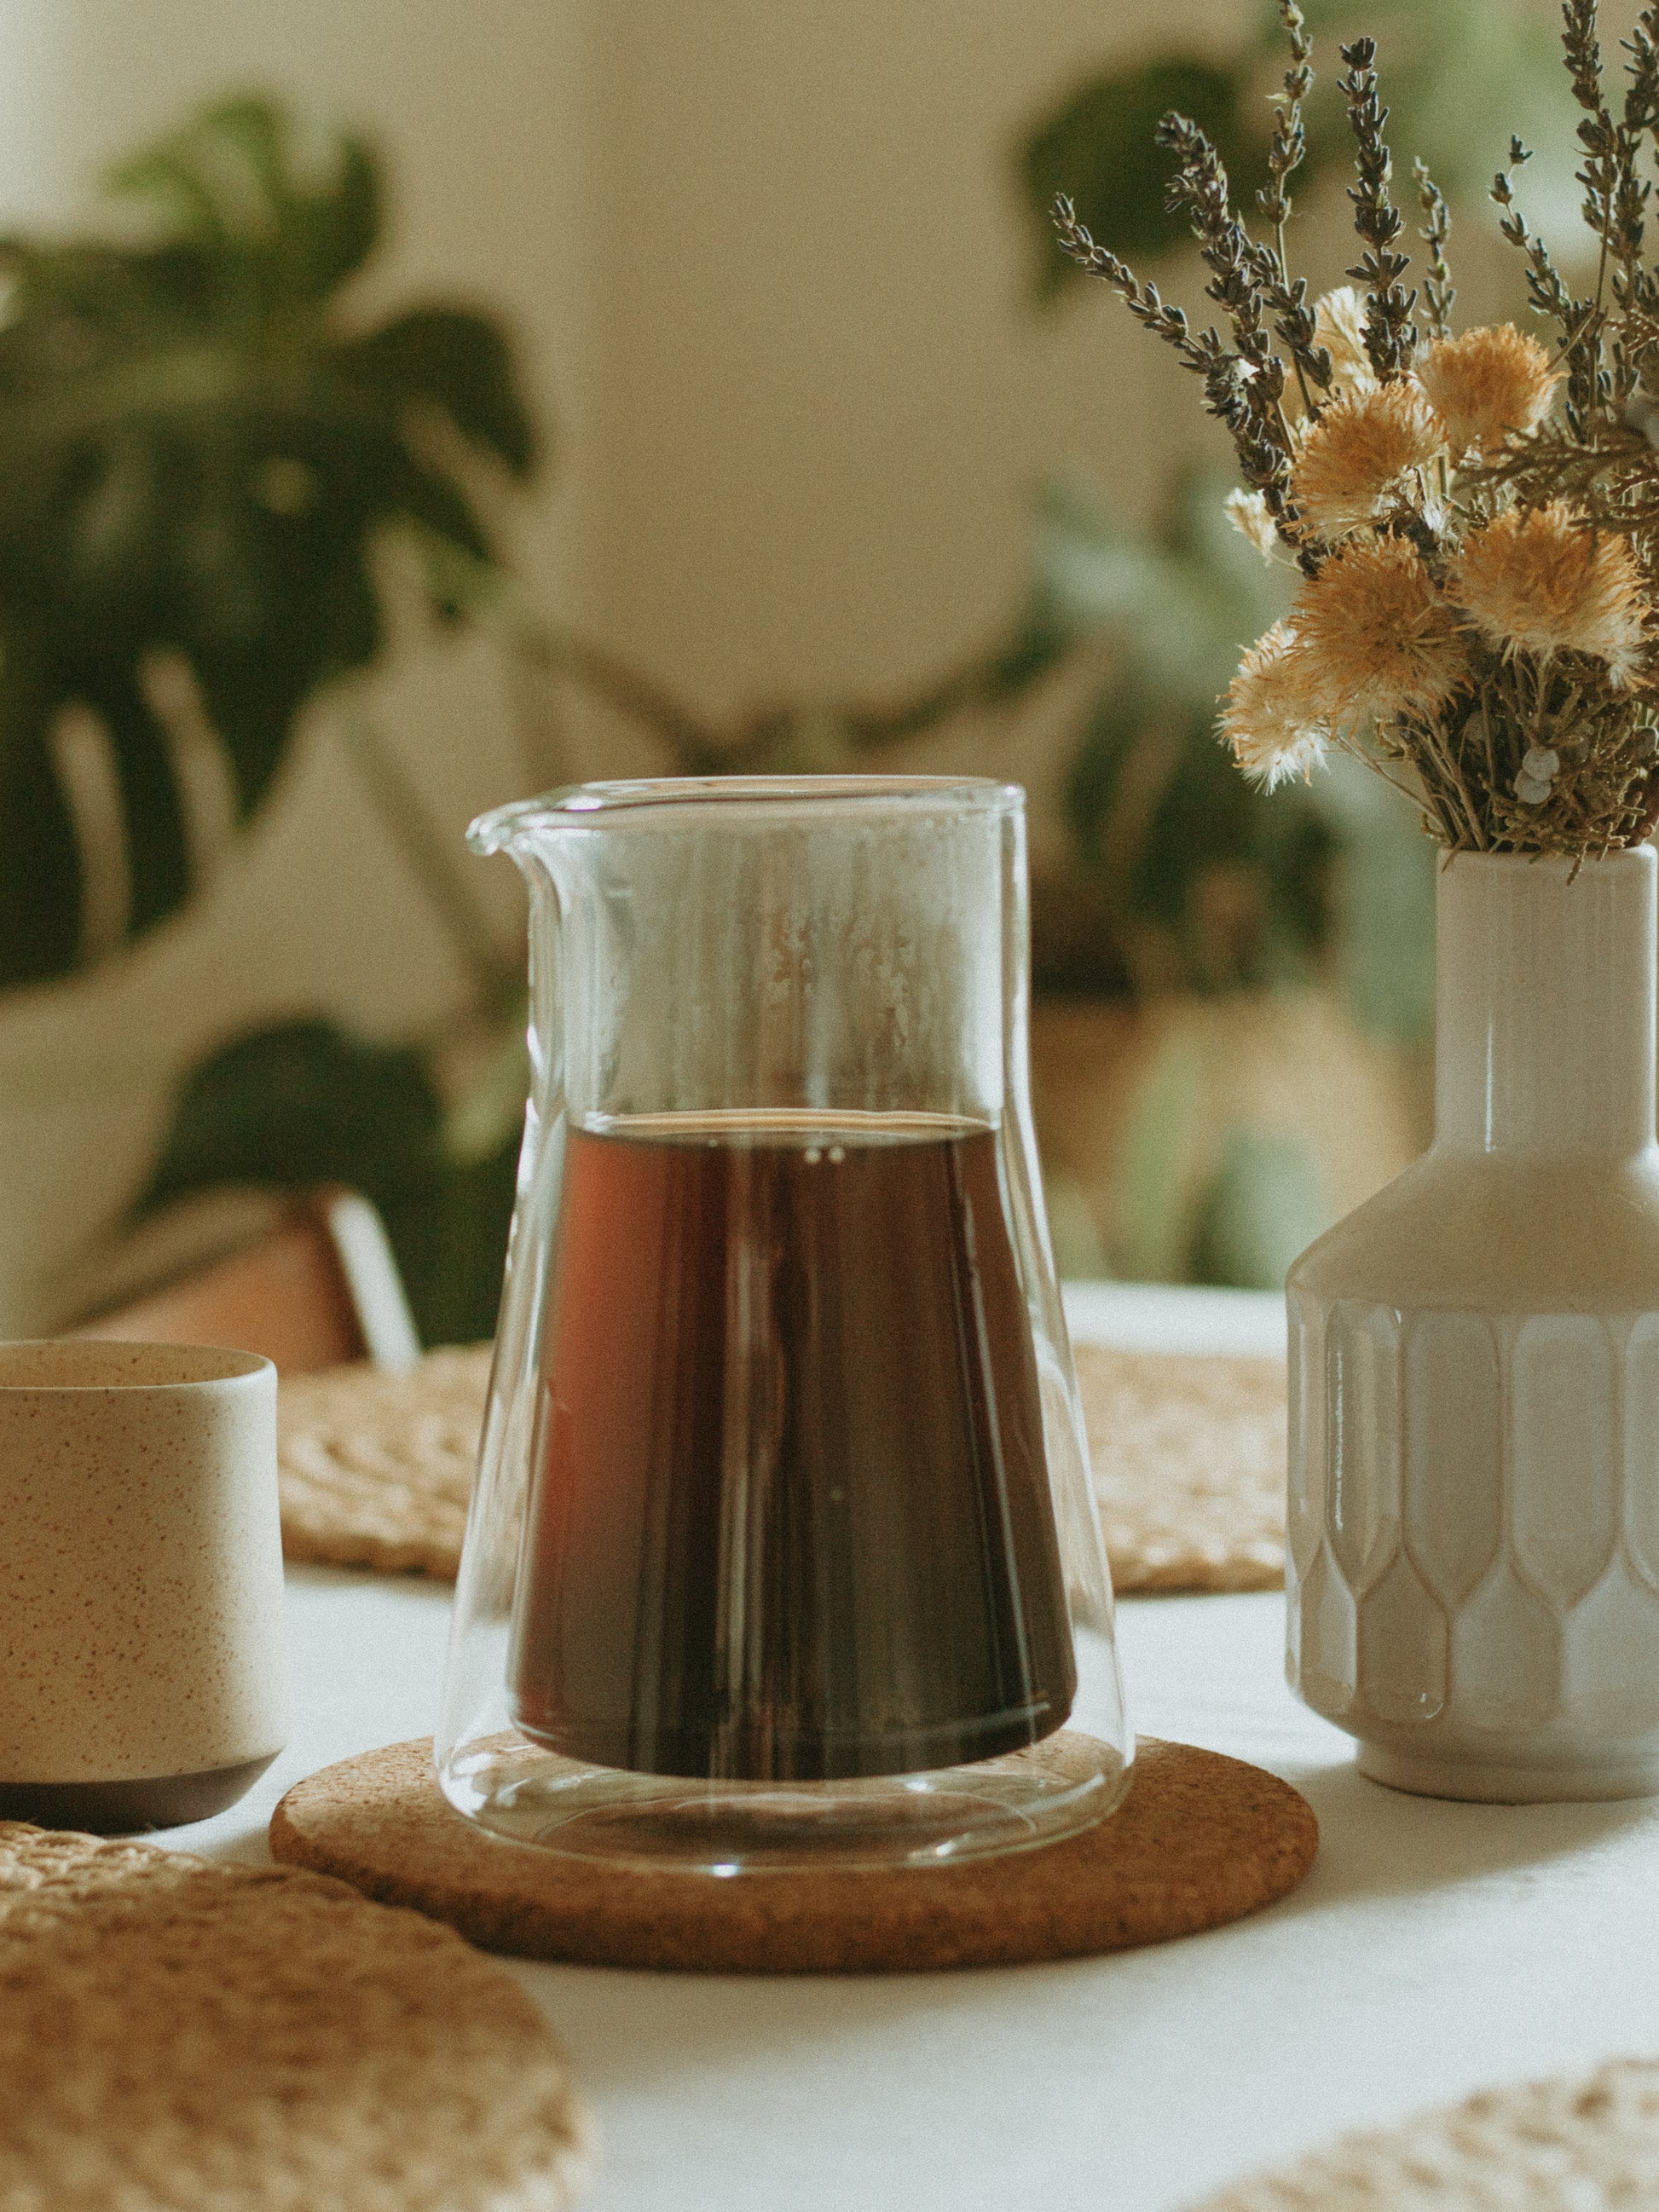 STAGG [XF] POUR-OVER SET – FAREWELL COFFEE ROASTERS